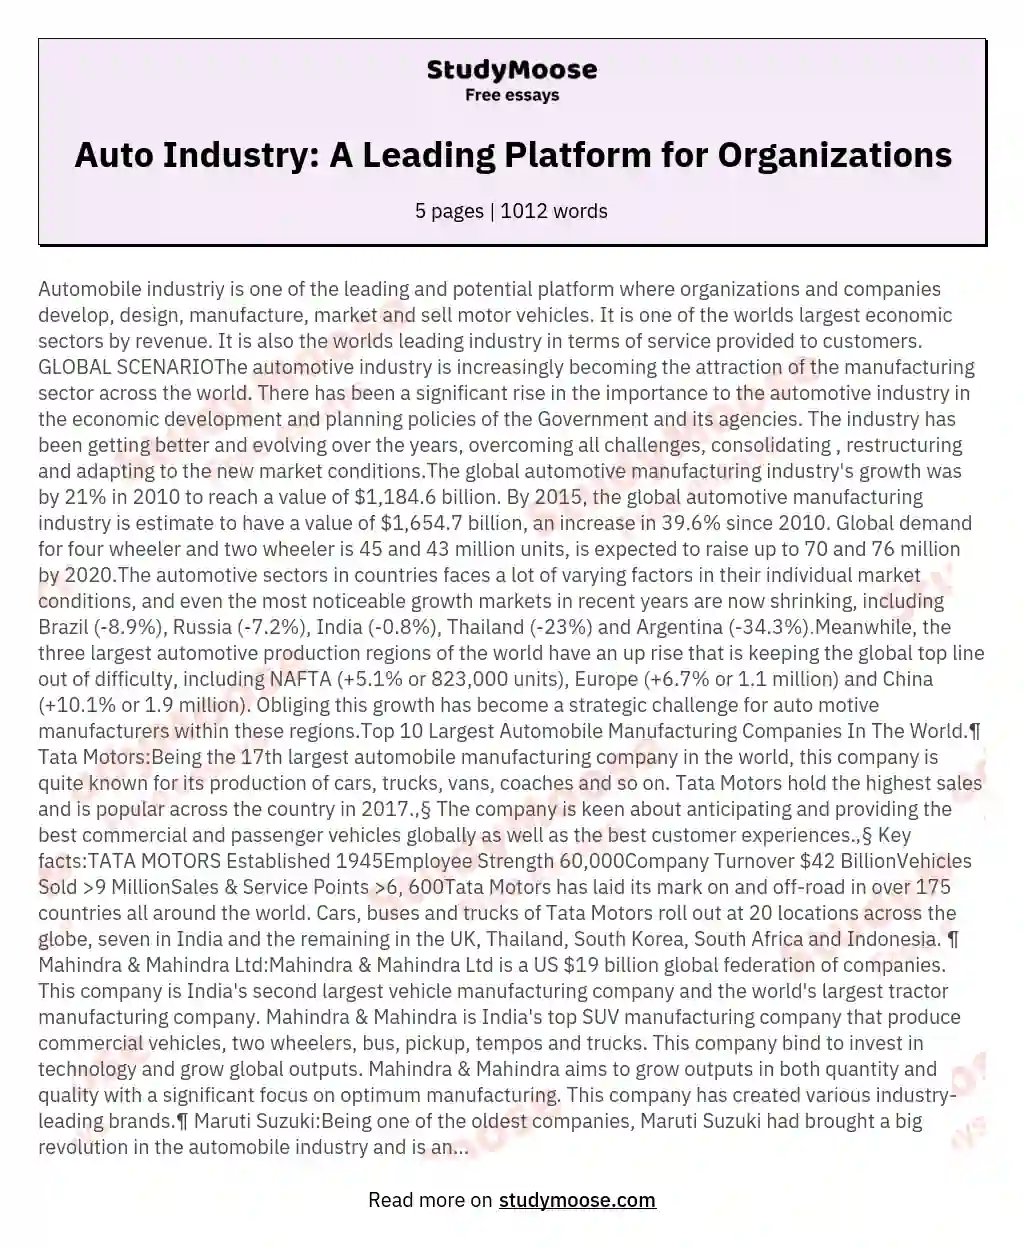 Auto Industry: A Leading Platform for Organizations essay